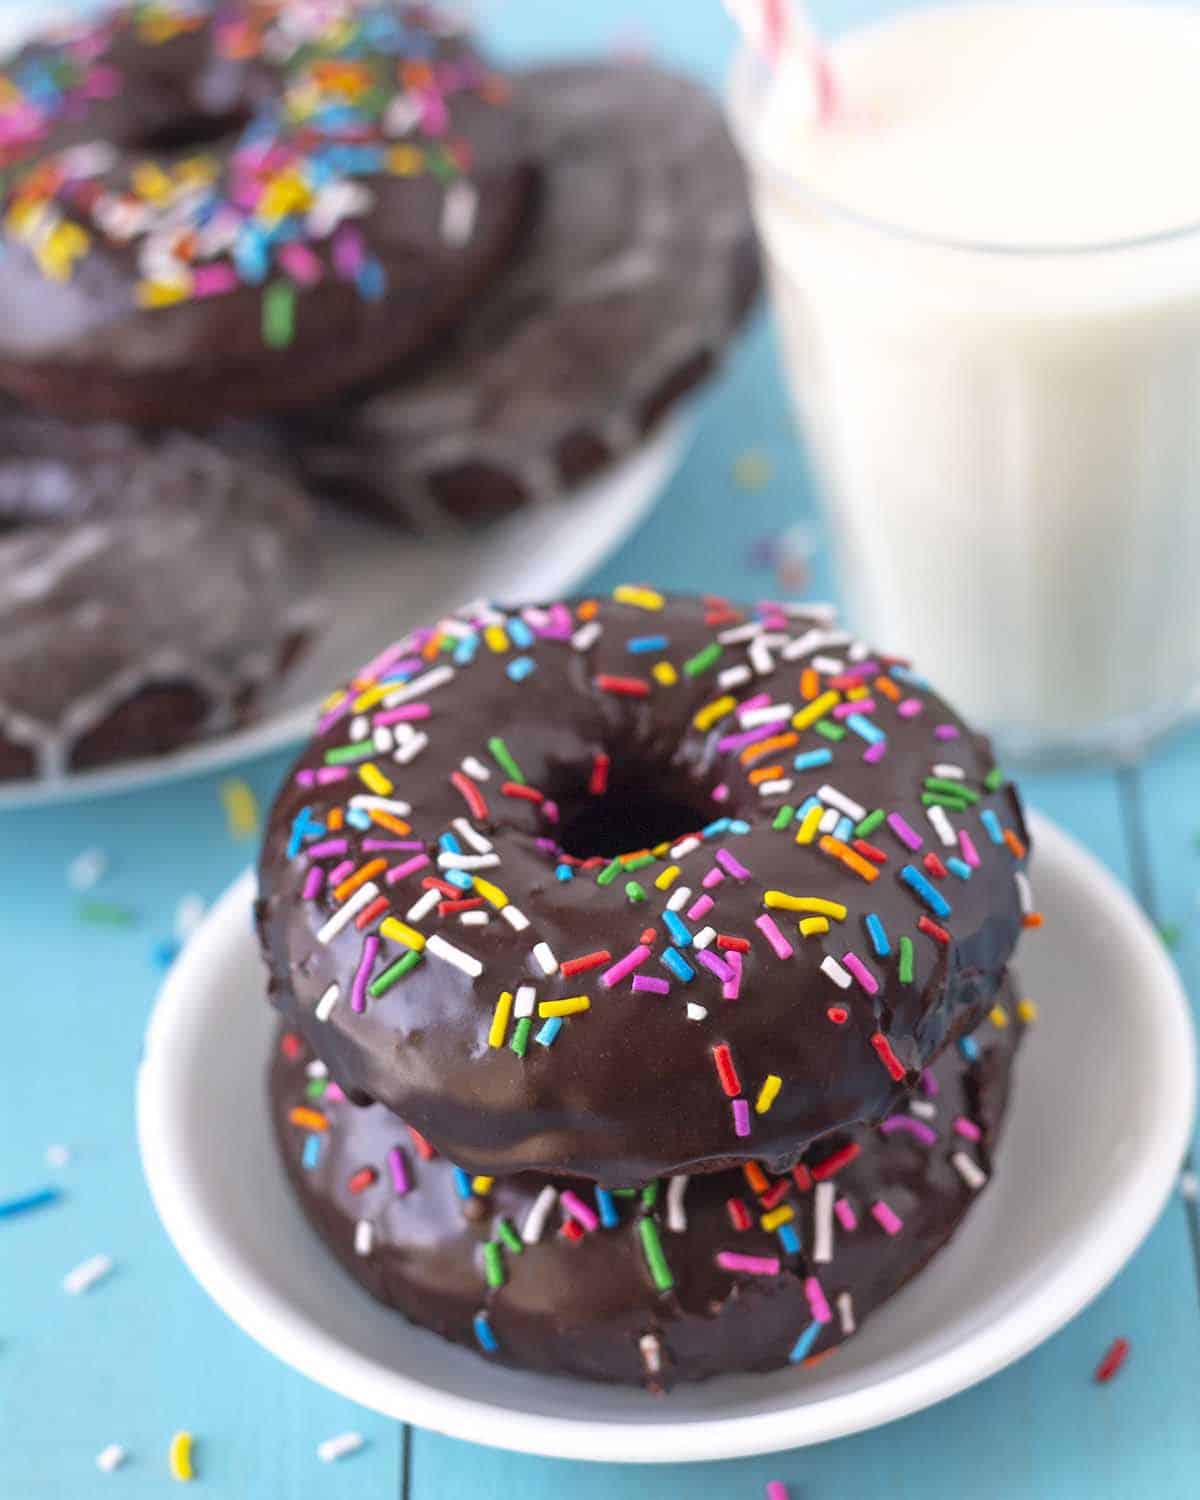 Two chocolate dipped vegan chocolate donuts with sprinkles sitting on a small white plate.